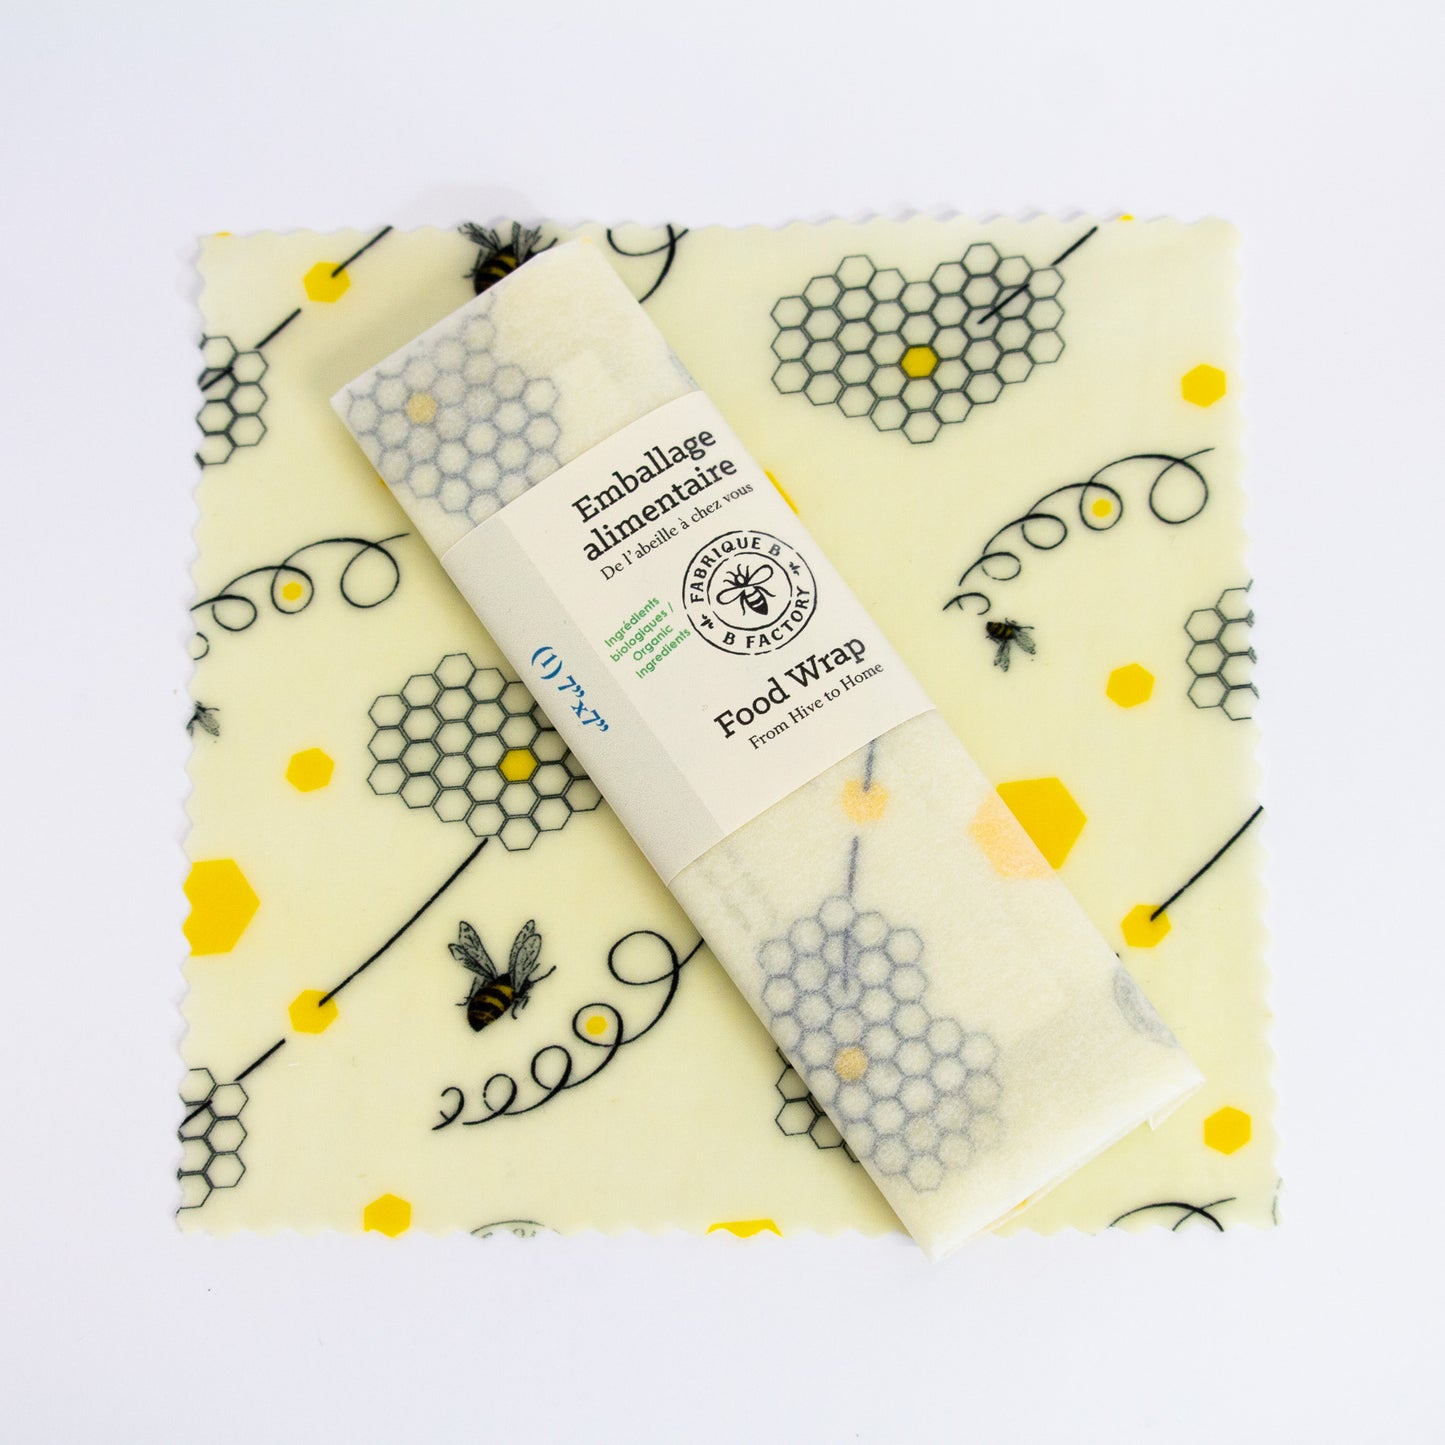 A 7-inch square patterned beeswax food wrap with honeycomb and bee design and a wrapped beeswax wrap sitting on top with B Factory logo